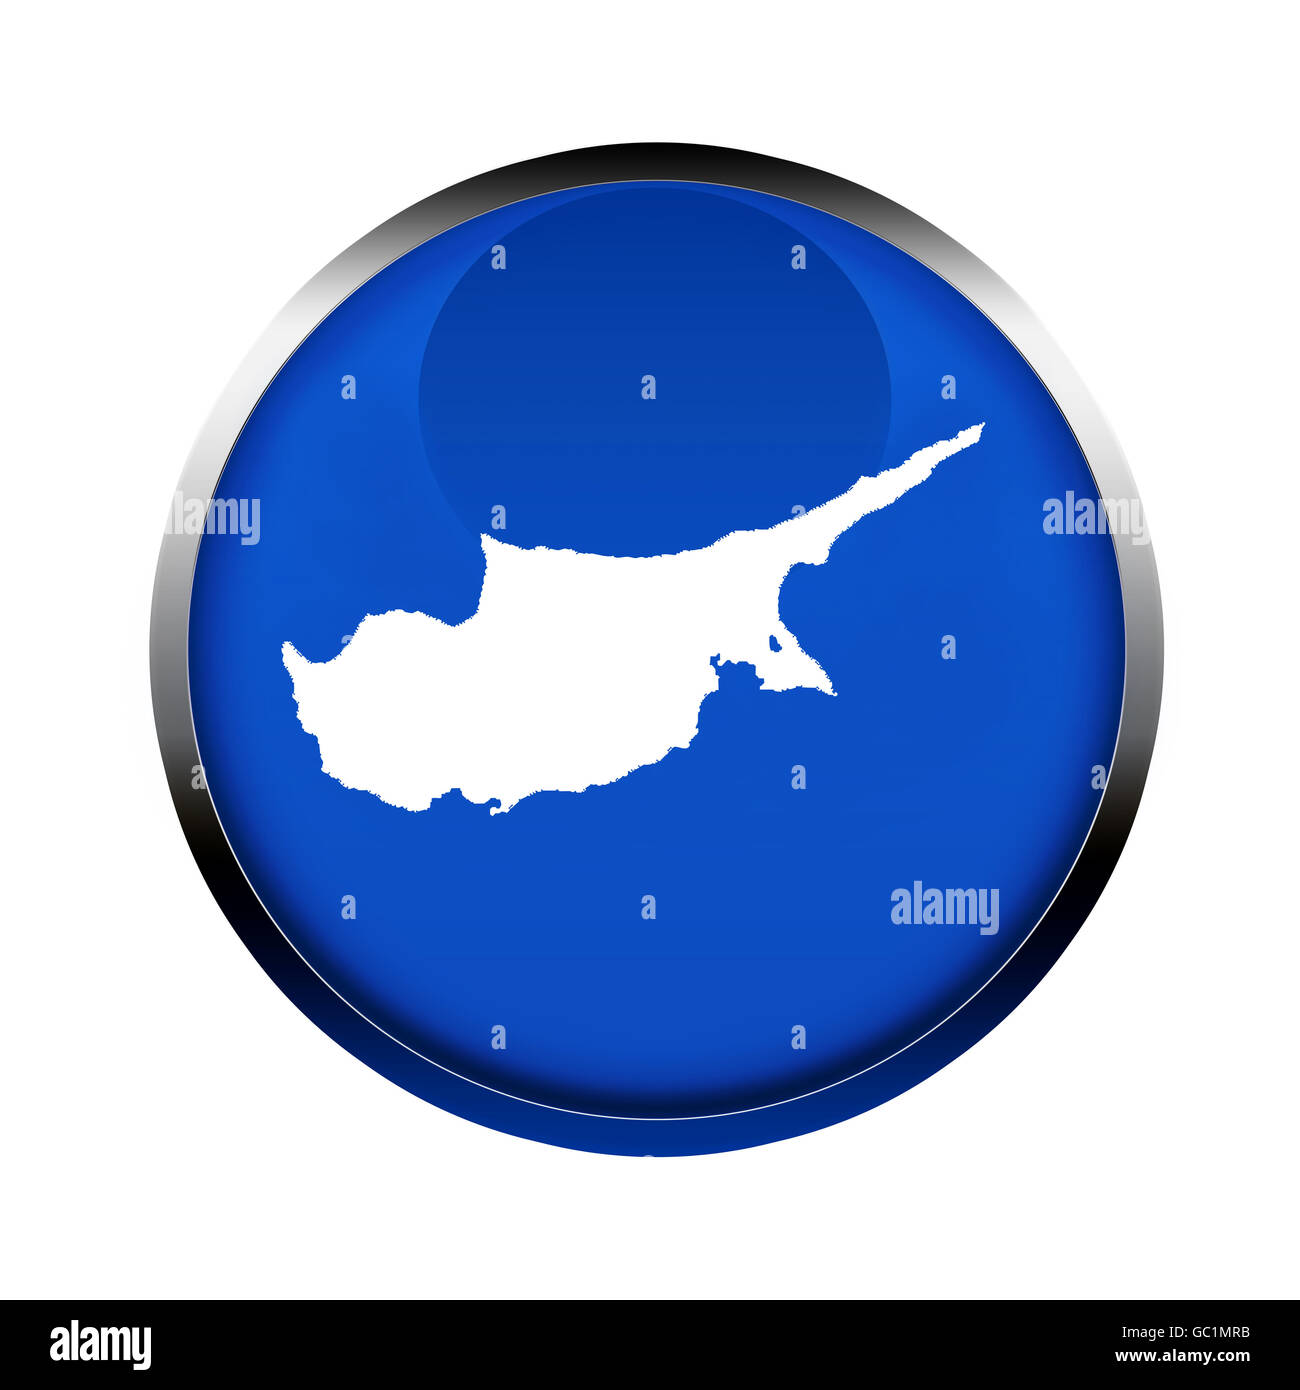 Cyprus map button in the colors of the European Union. Stock Photo